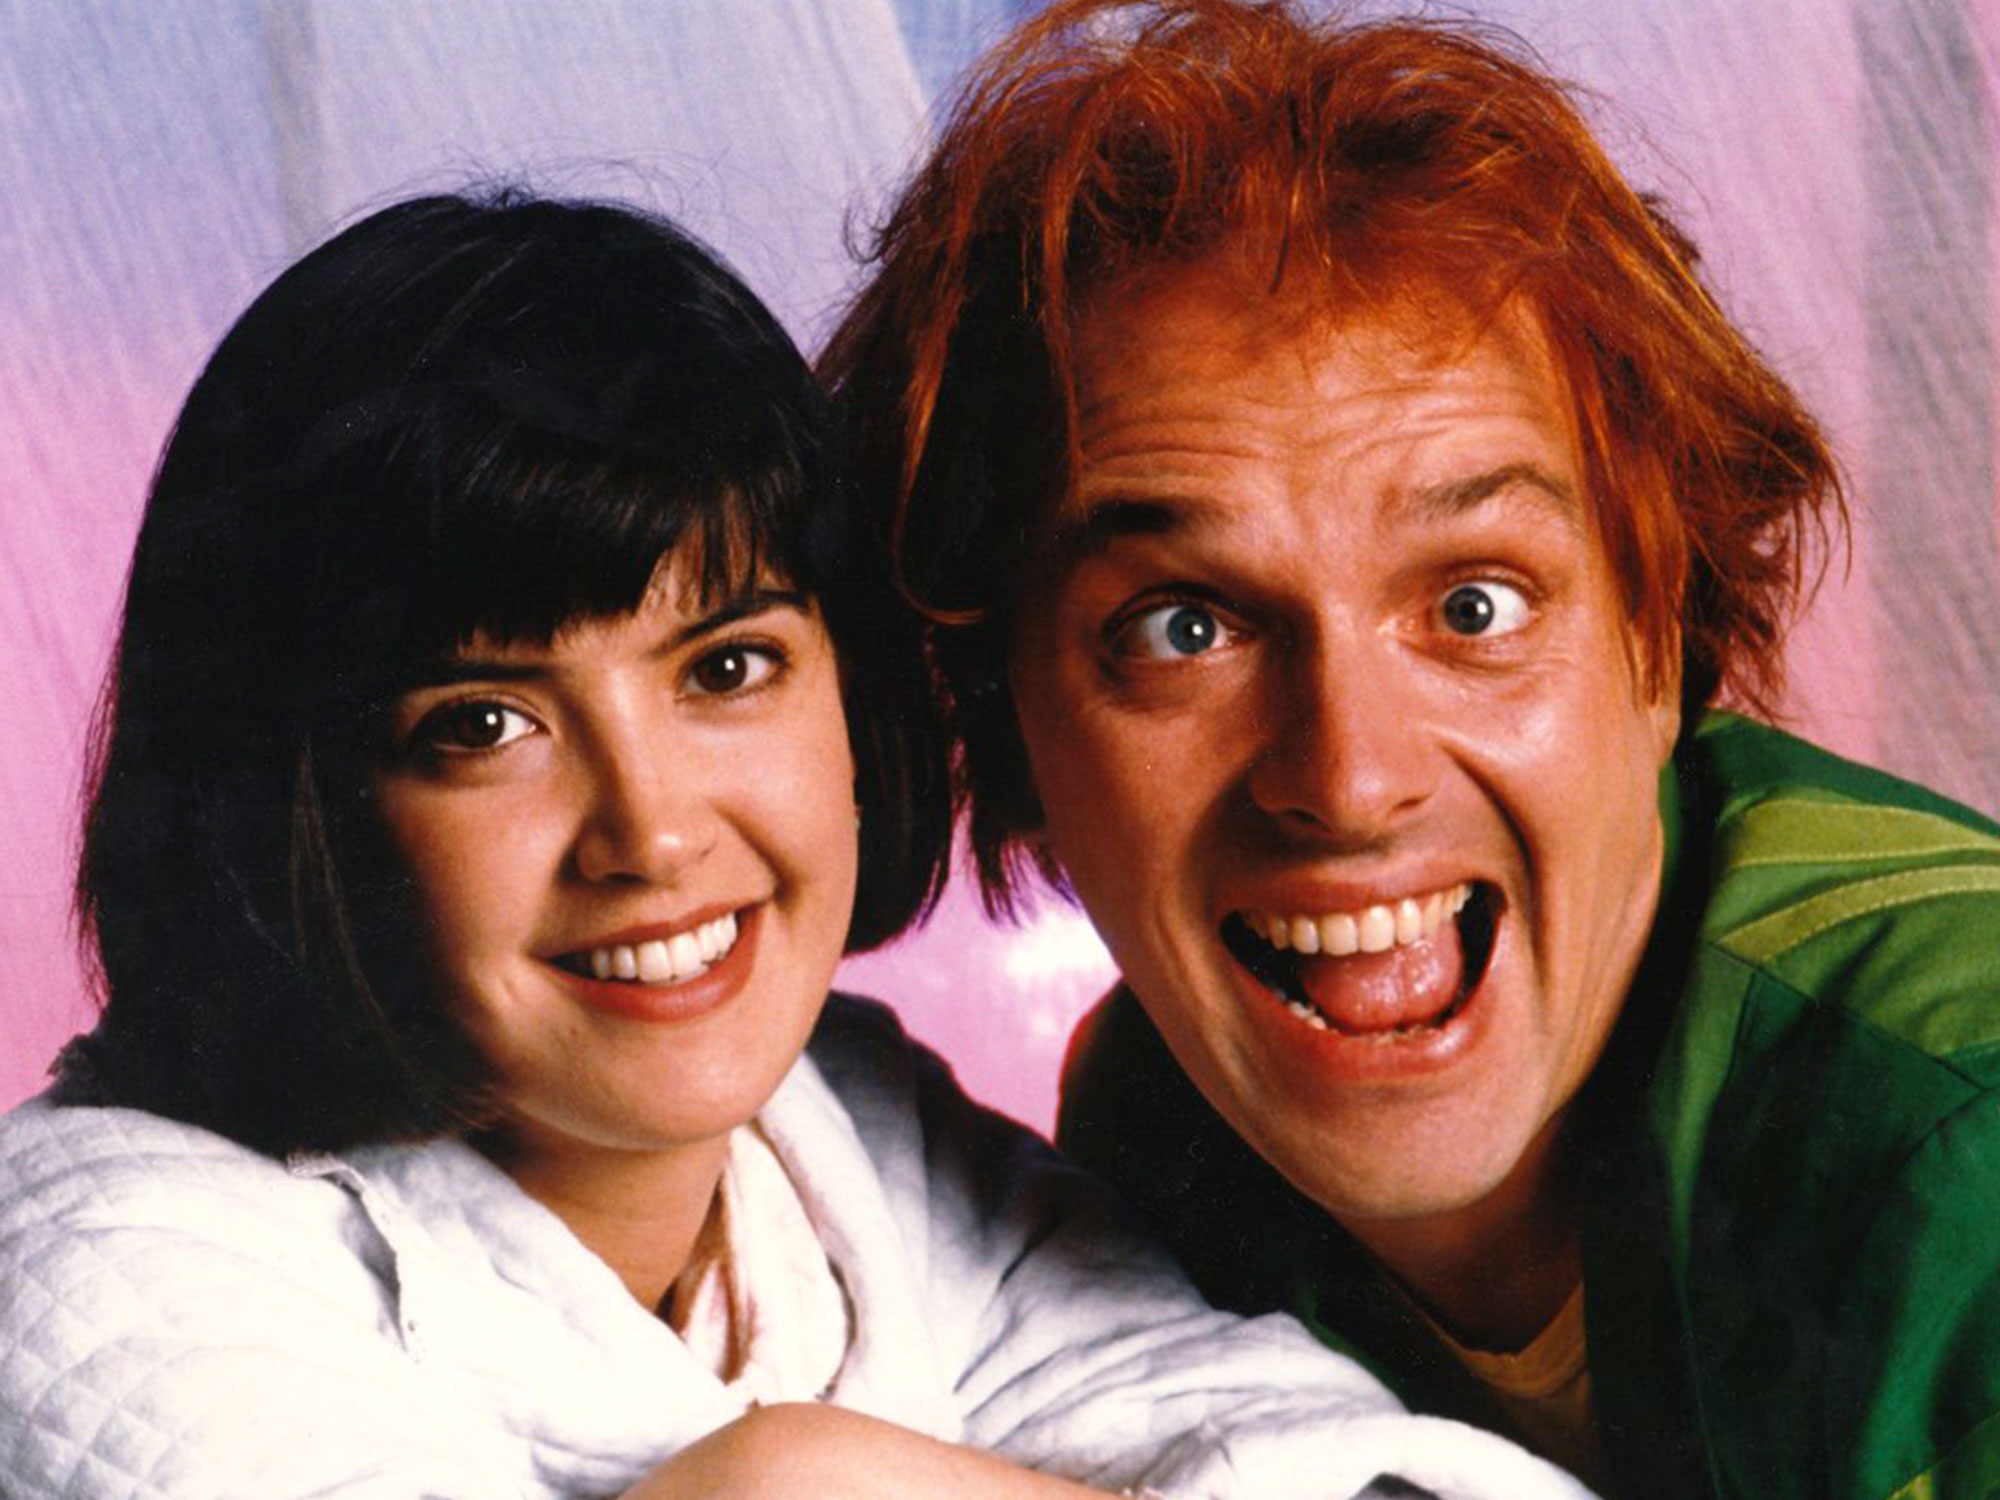 3. "Drop Dead Fred" quote tattoo - wide 1